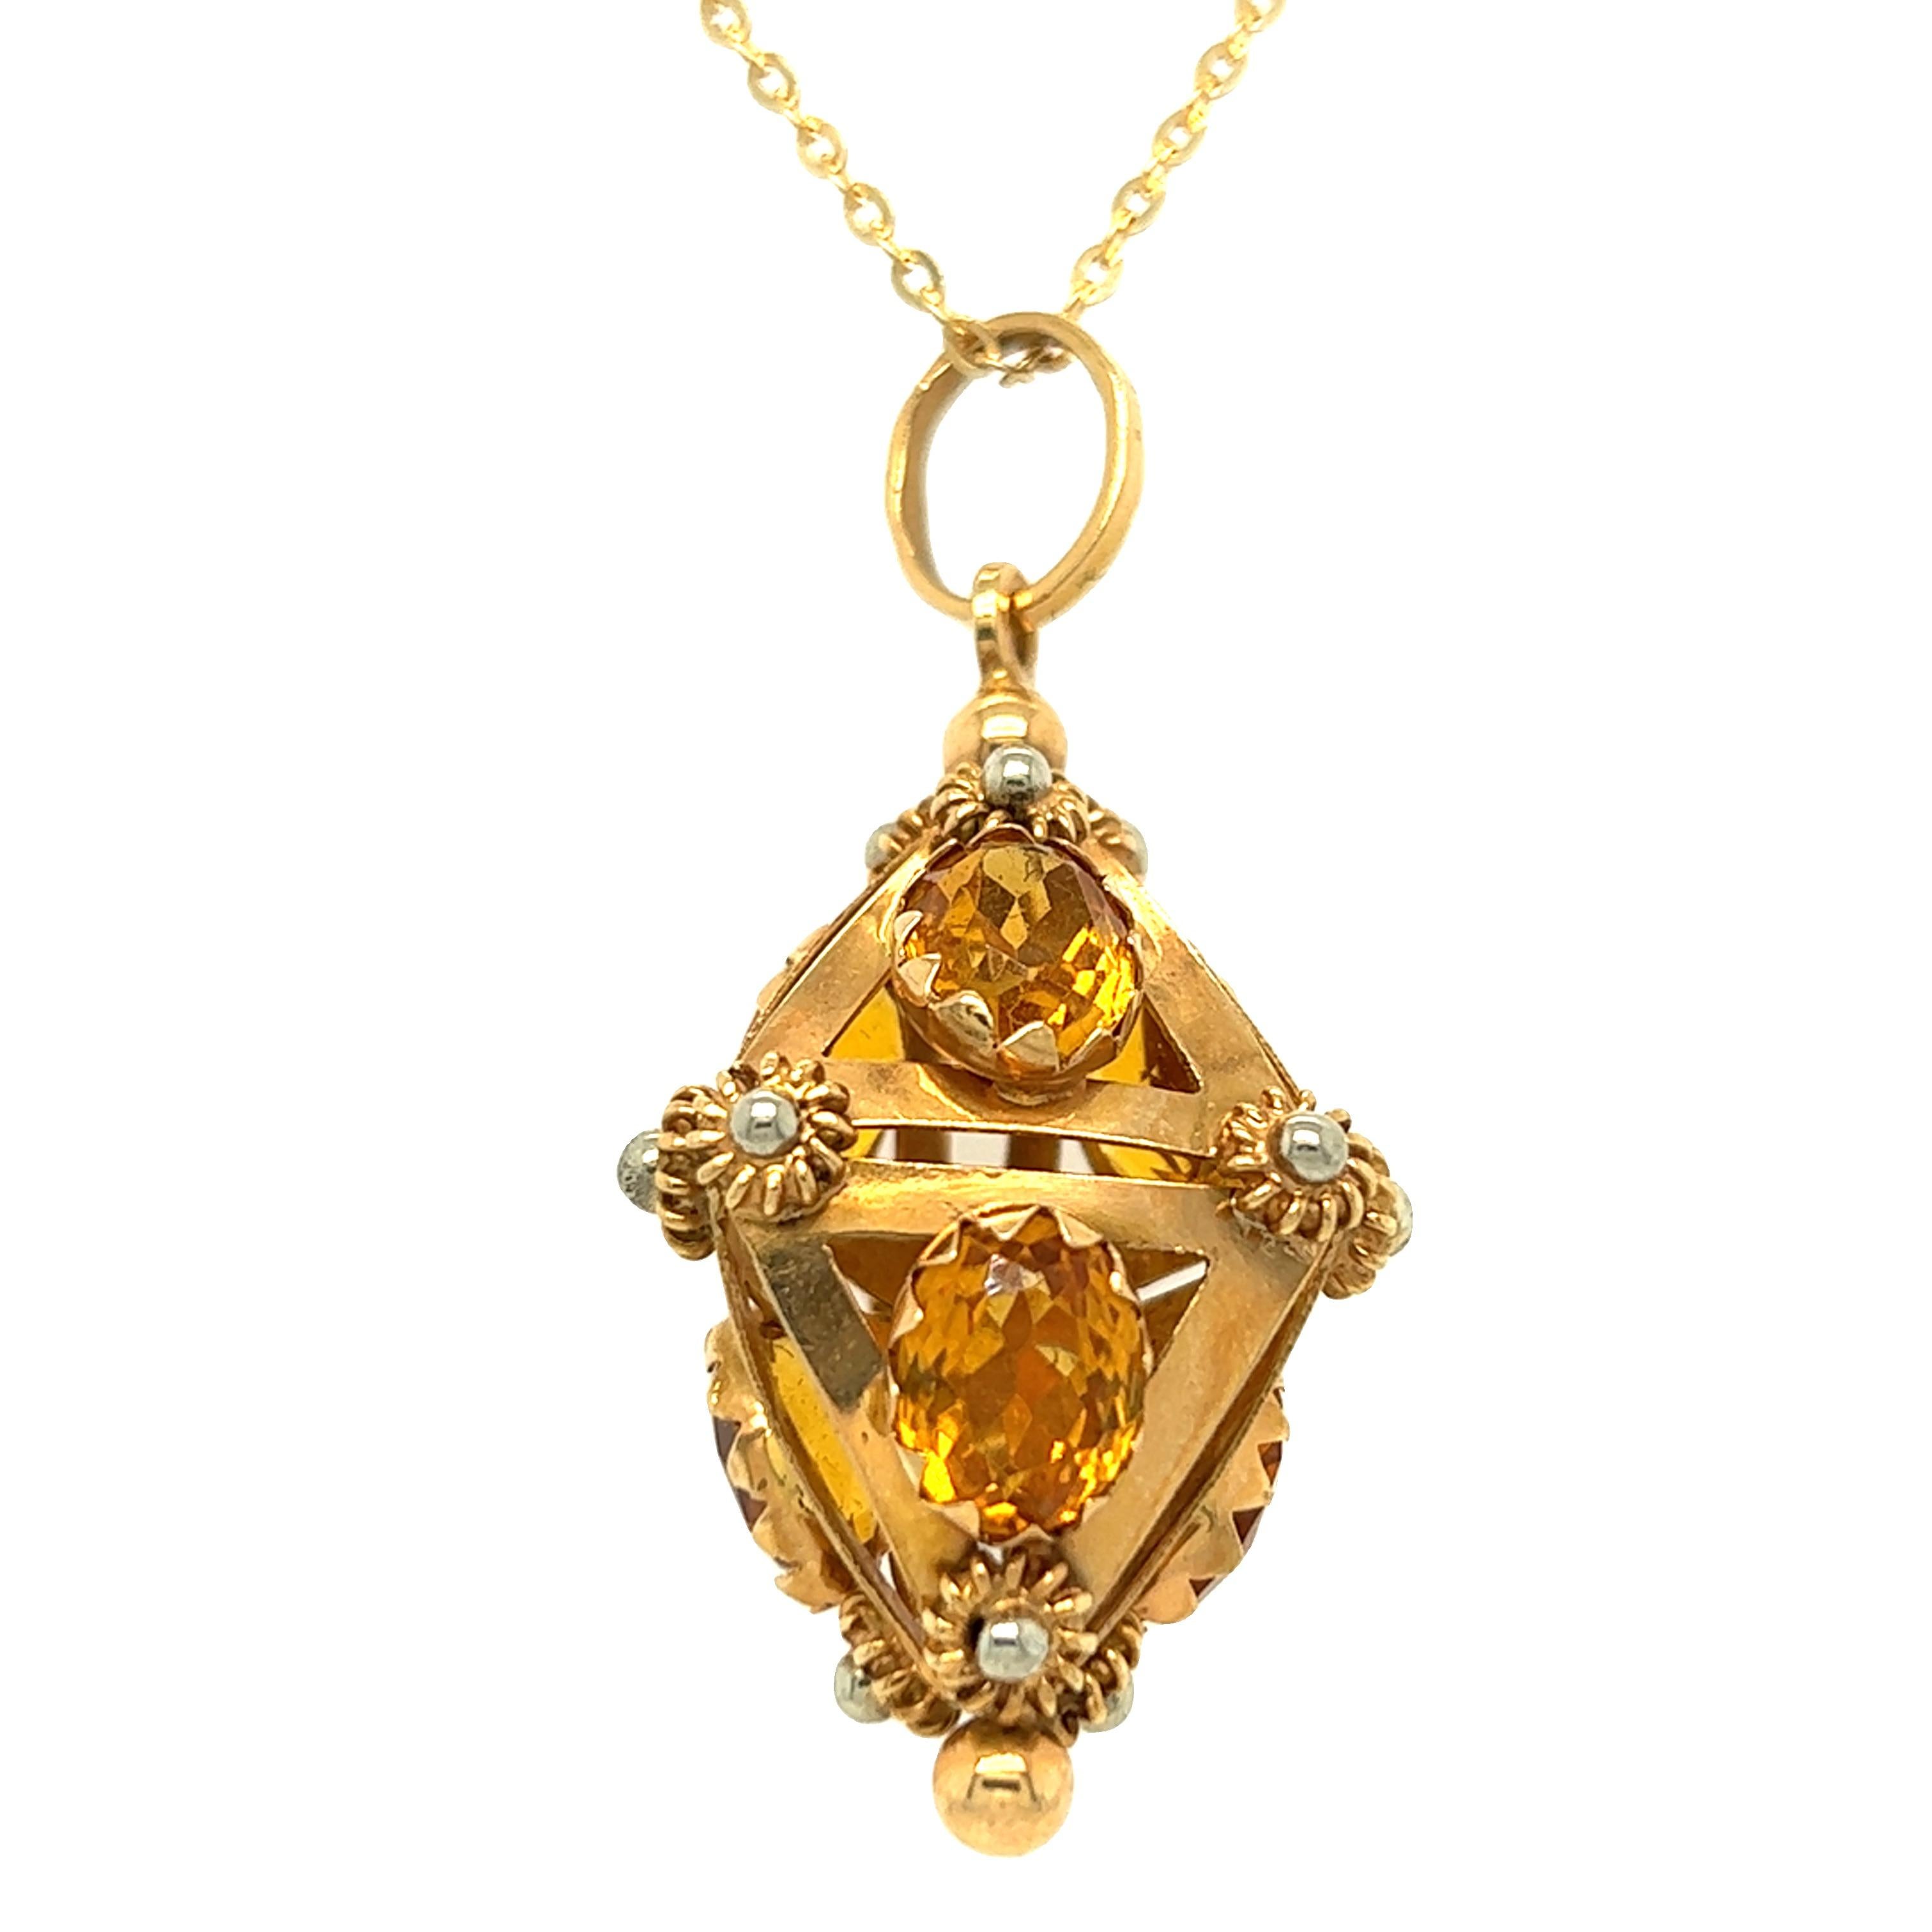 Etruscan Revival Lantern Fob Citrine Pendant 18k Yellow Gold In Excellent Condition For Sale In beverly hills, CA